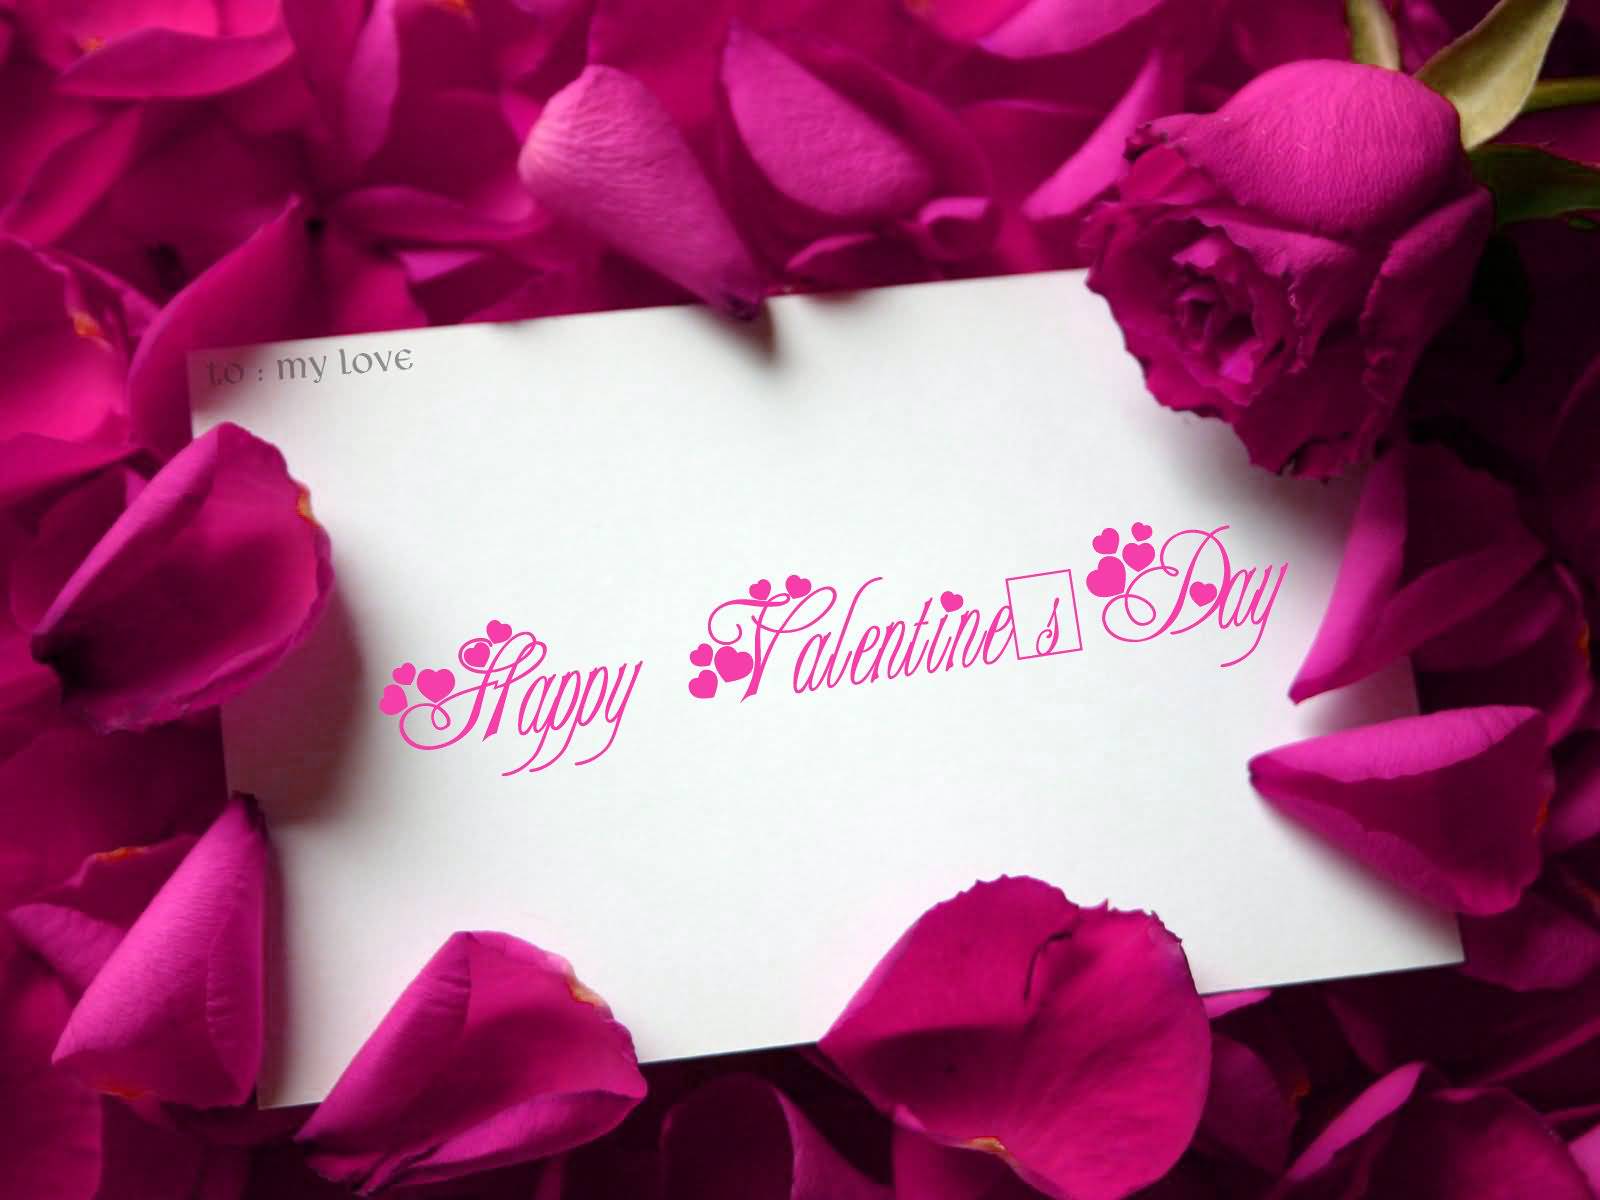 Happy Valentine’s Day Note With Rose Flower Petals Wallpaper